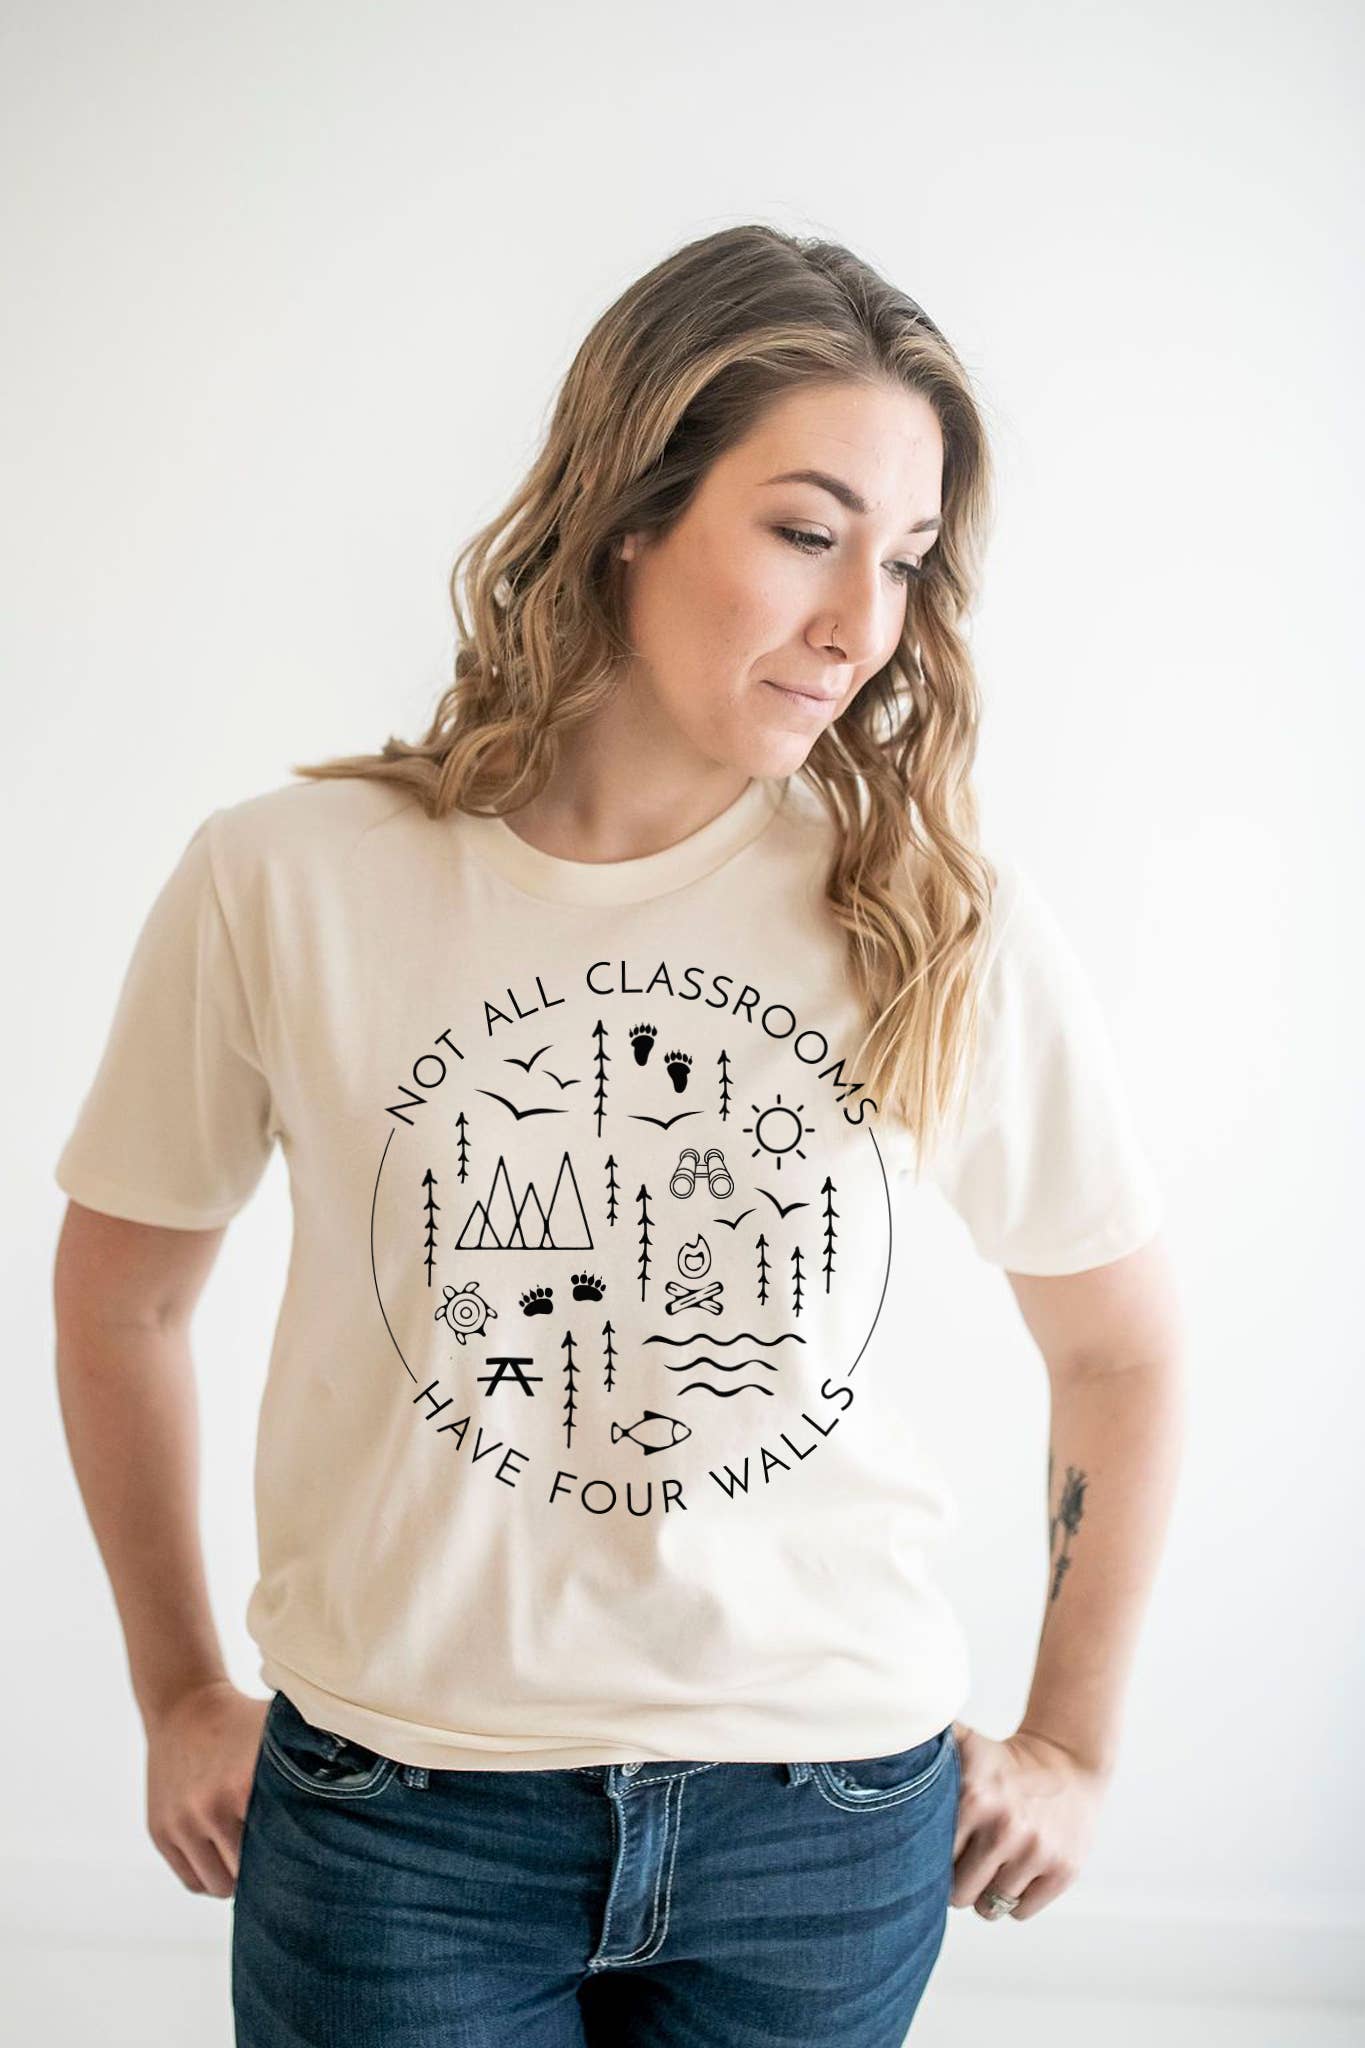 Nature Supply Co - Not All Classrooms Have Four Walls Graphic Tee for Women - L / Mauve